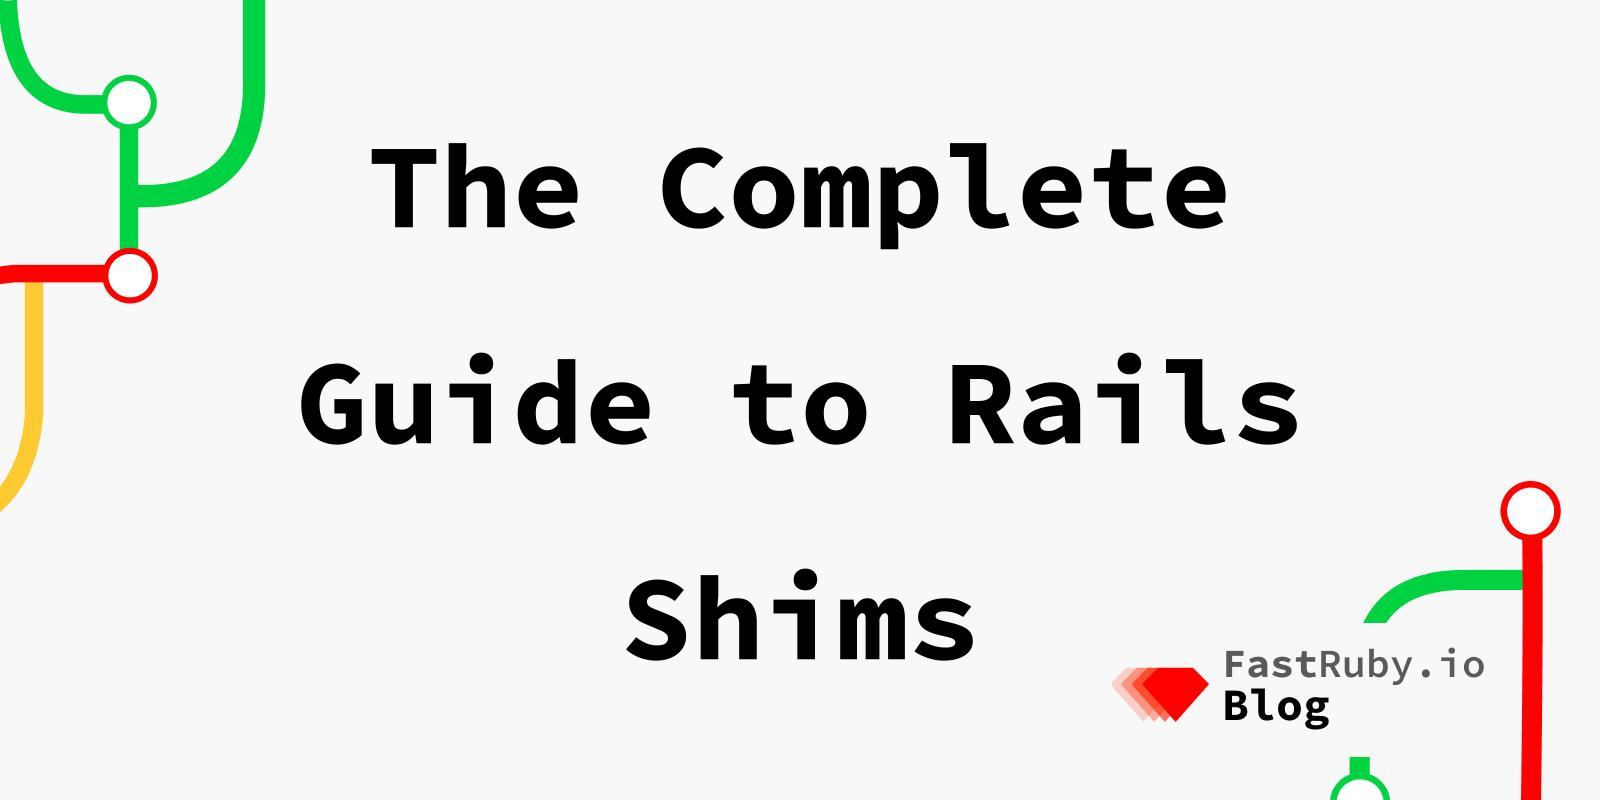 The Complete Guide to Rails Shims